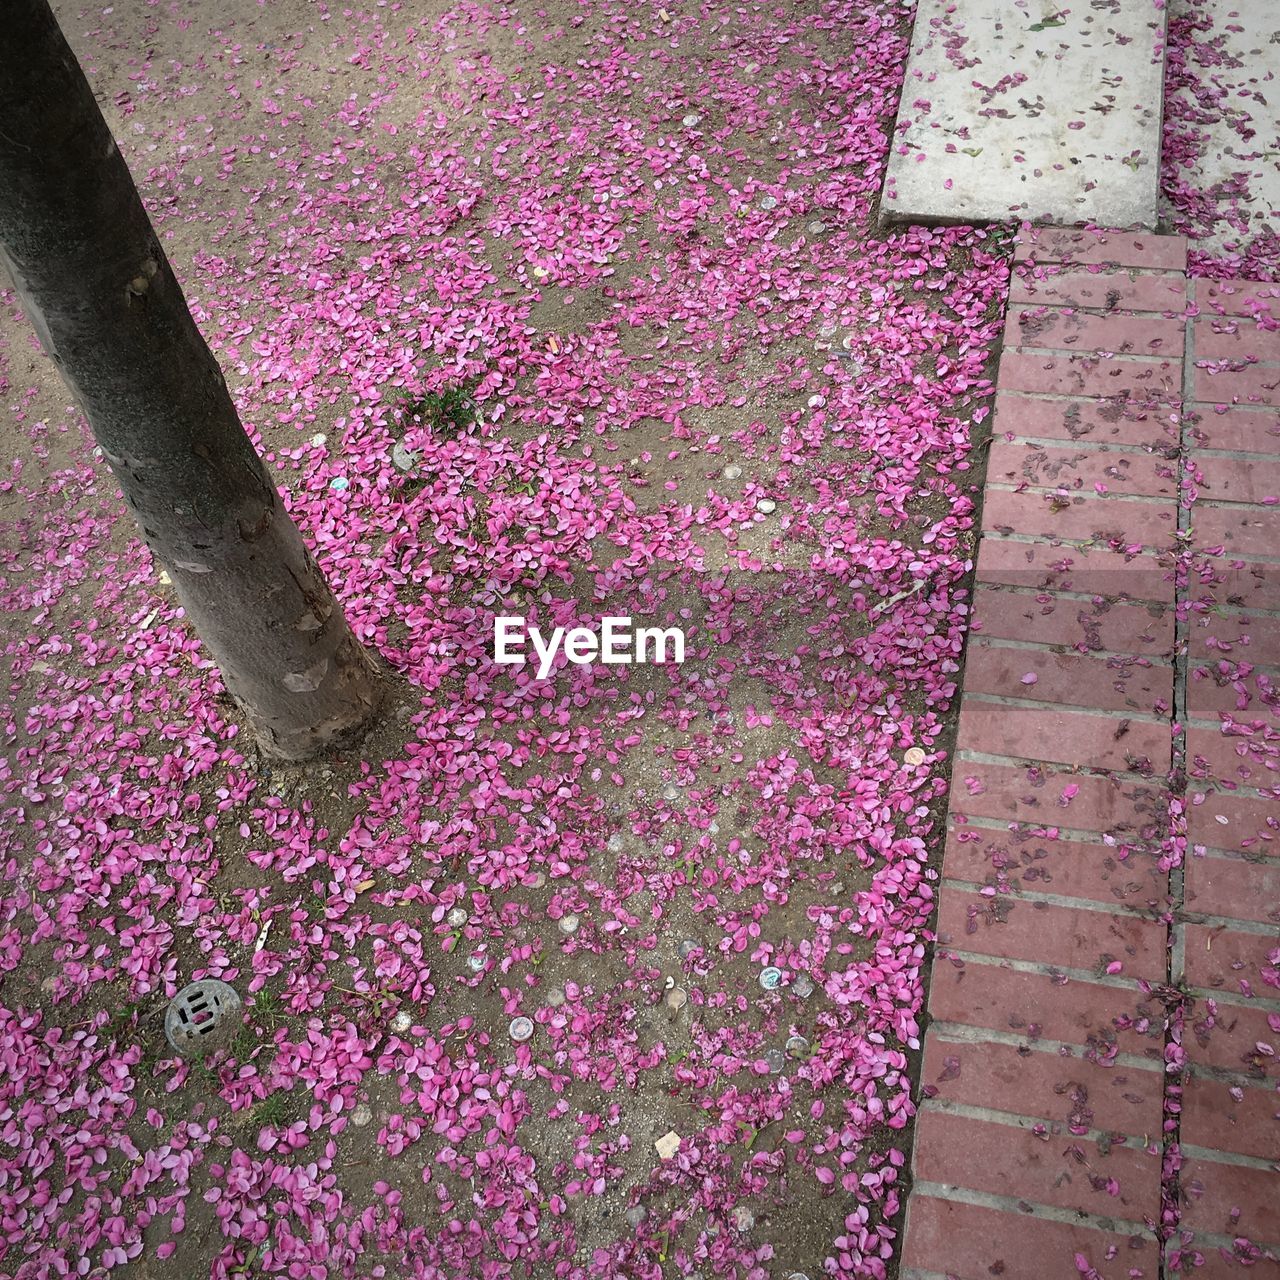 HIGH ANGLE VIEW OF PINK FLOWER PETALS